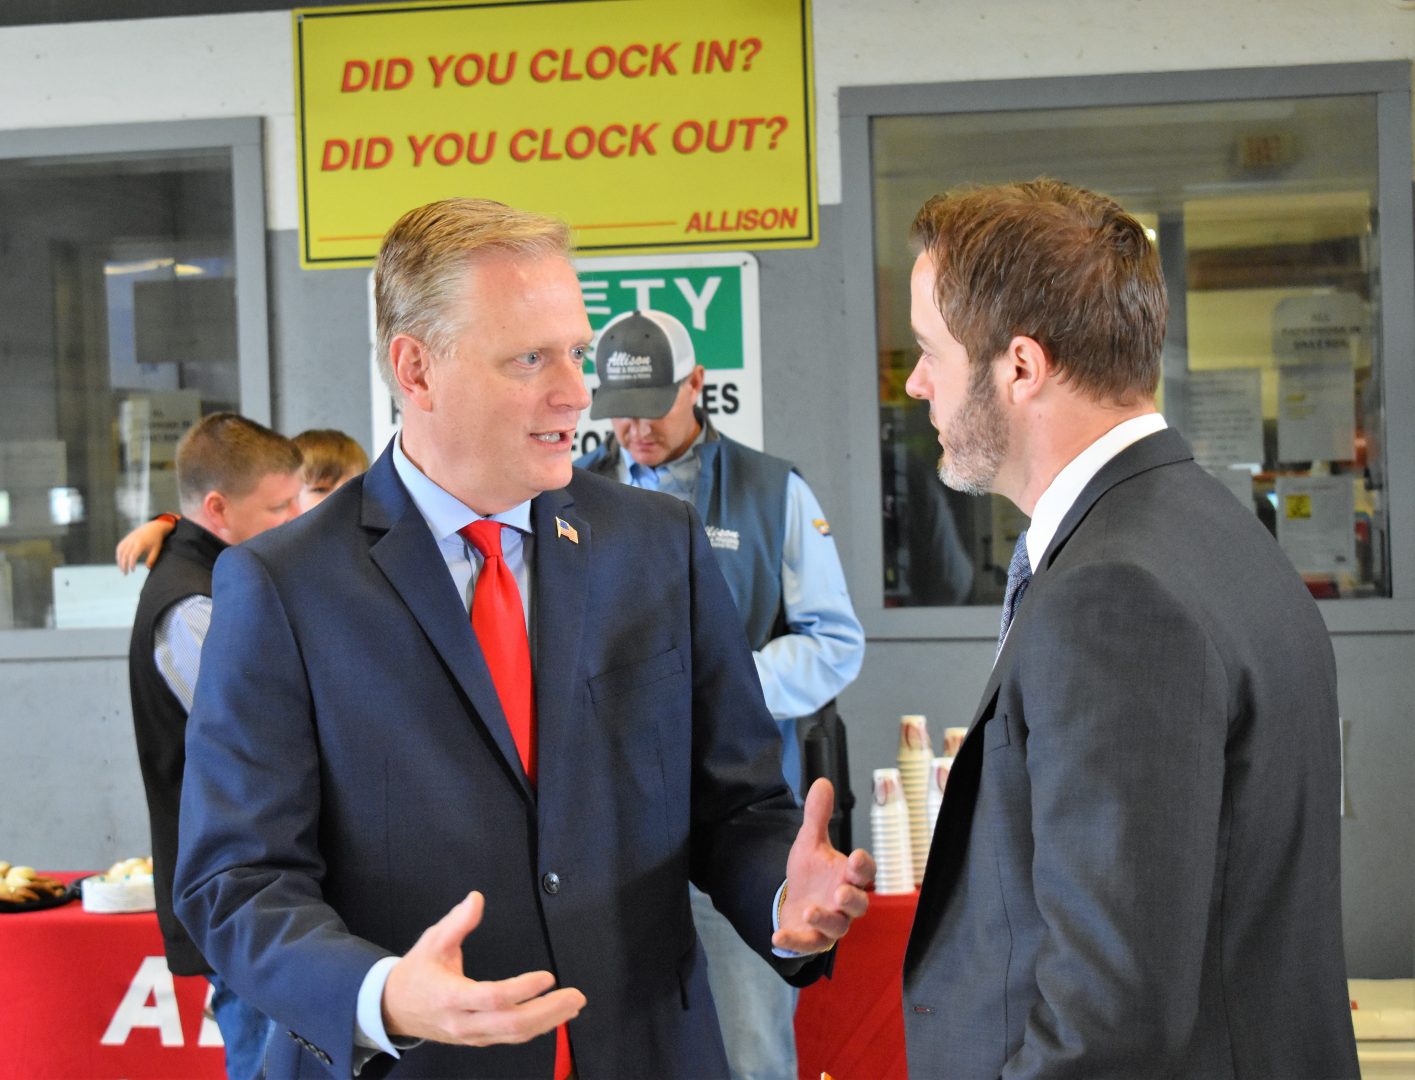 Republican congressional candidate Fred Keller speaks with Ben Taylor of the U.S. Chamber of Commerce on May 2, 2019. The chamber endorsed Keller during an event at Allison Crane & Rigging, outside Williamsport.